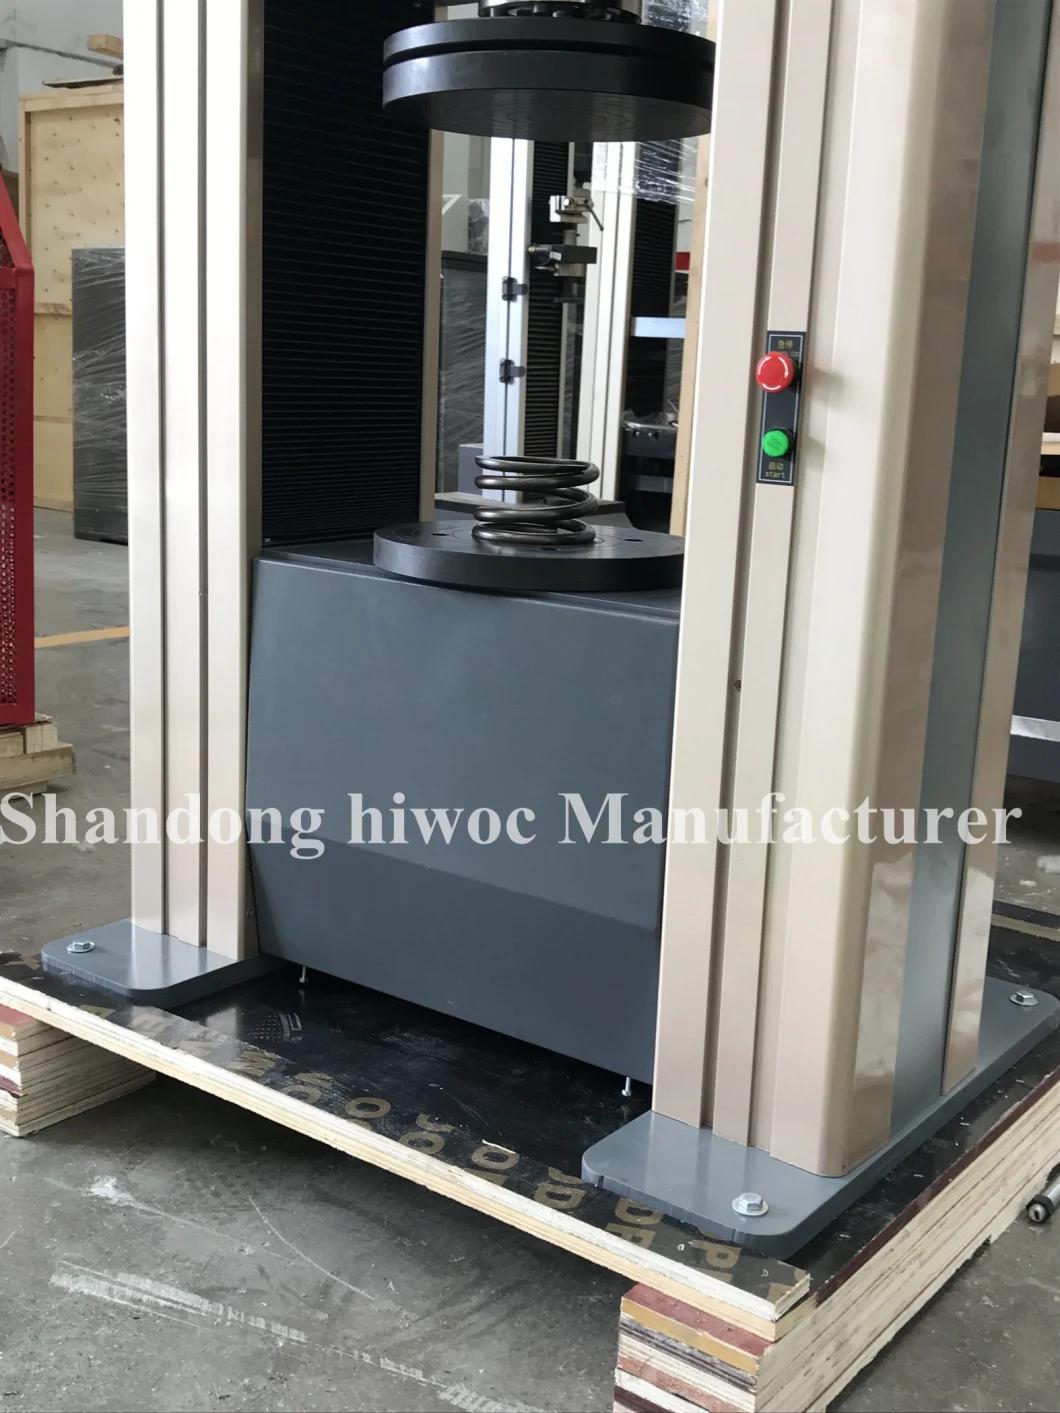 Factory Metal/Plastic/Rubber Material Universal Tensile/Compression/Bending Strength Testing Machine (20/50/100/200/300/600KN) Test Machine